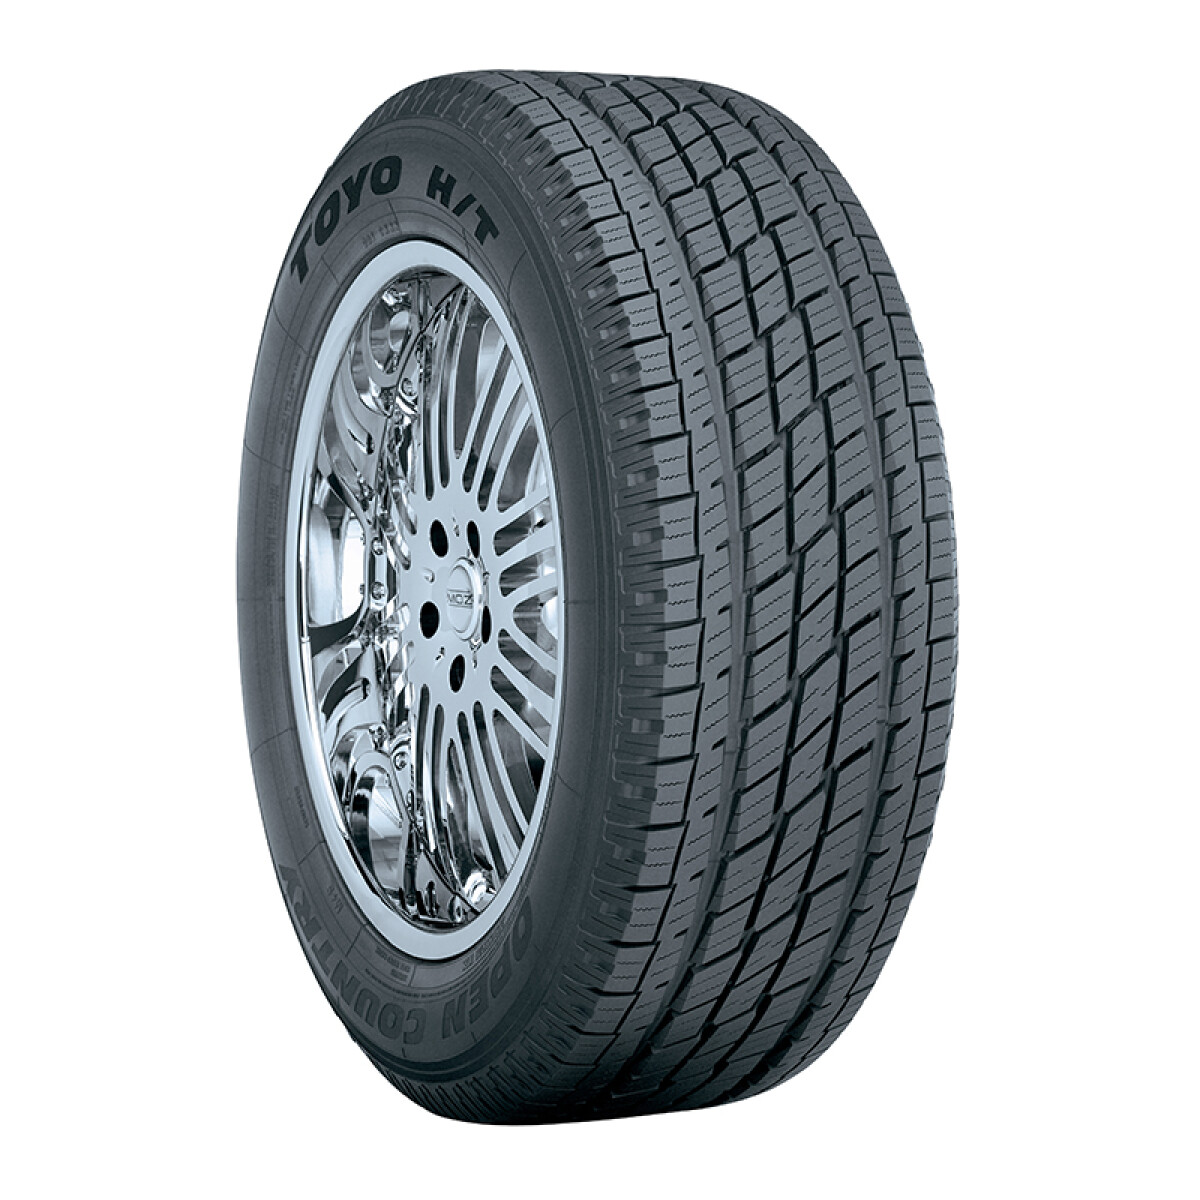 CUBIERTA NEUMATICO TOYO OPEN COUNTRY HT 215/70R16 100H 